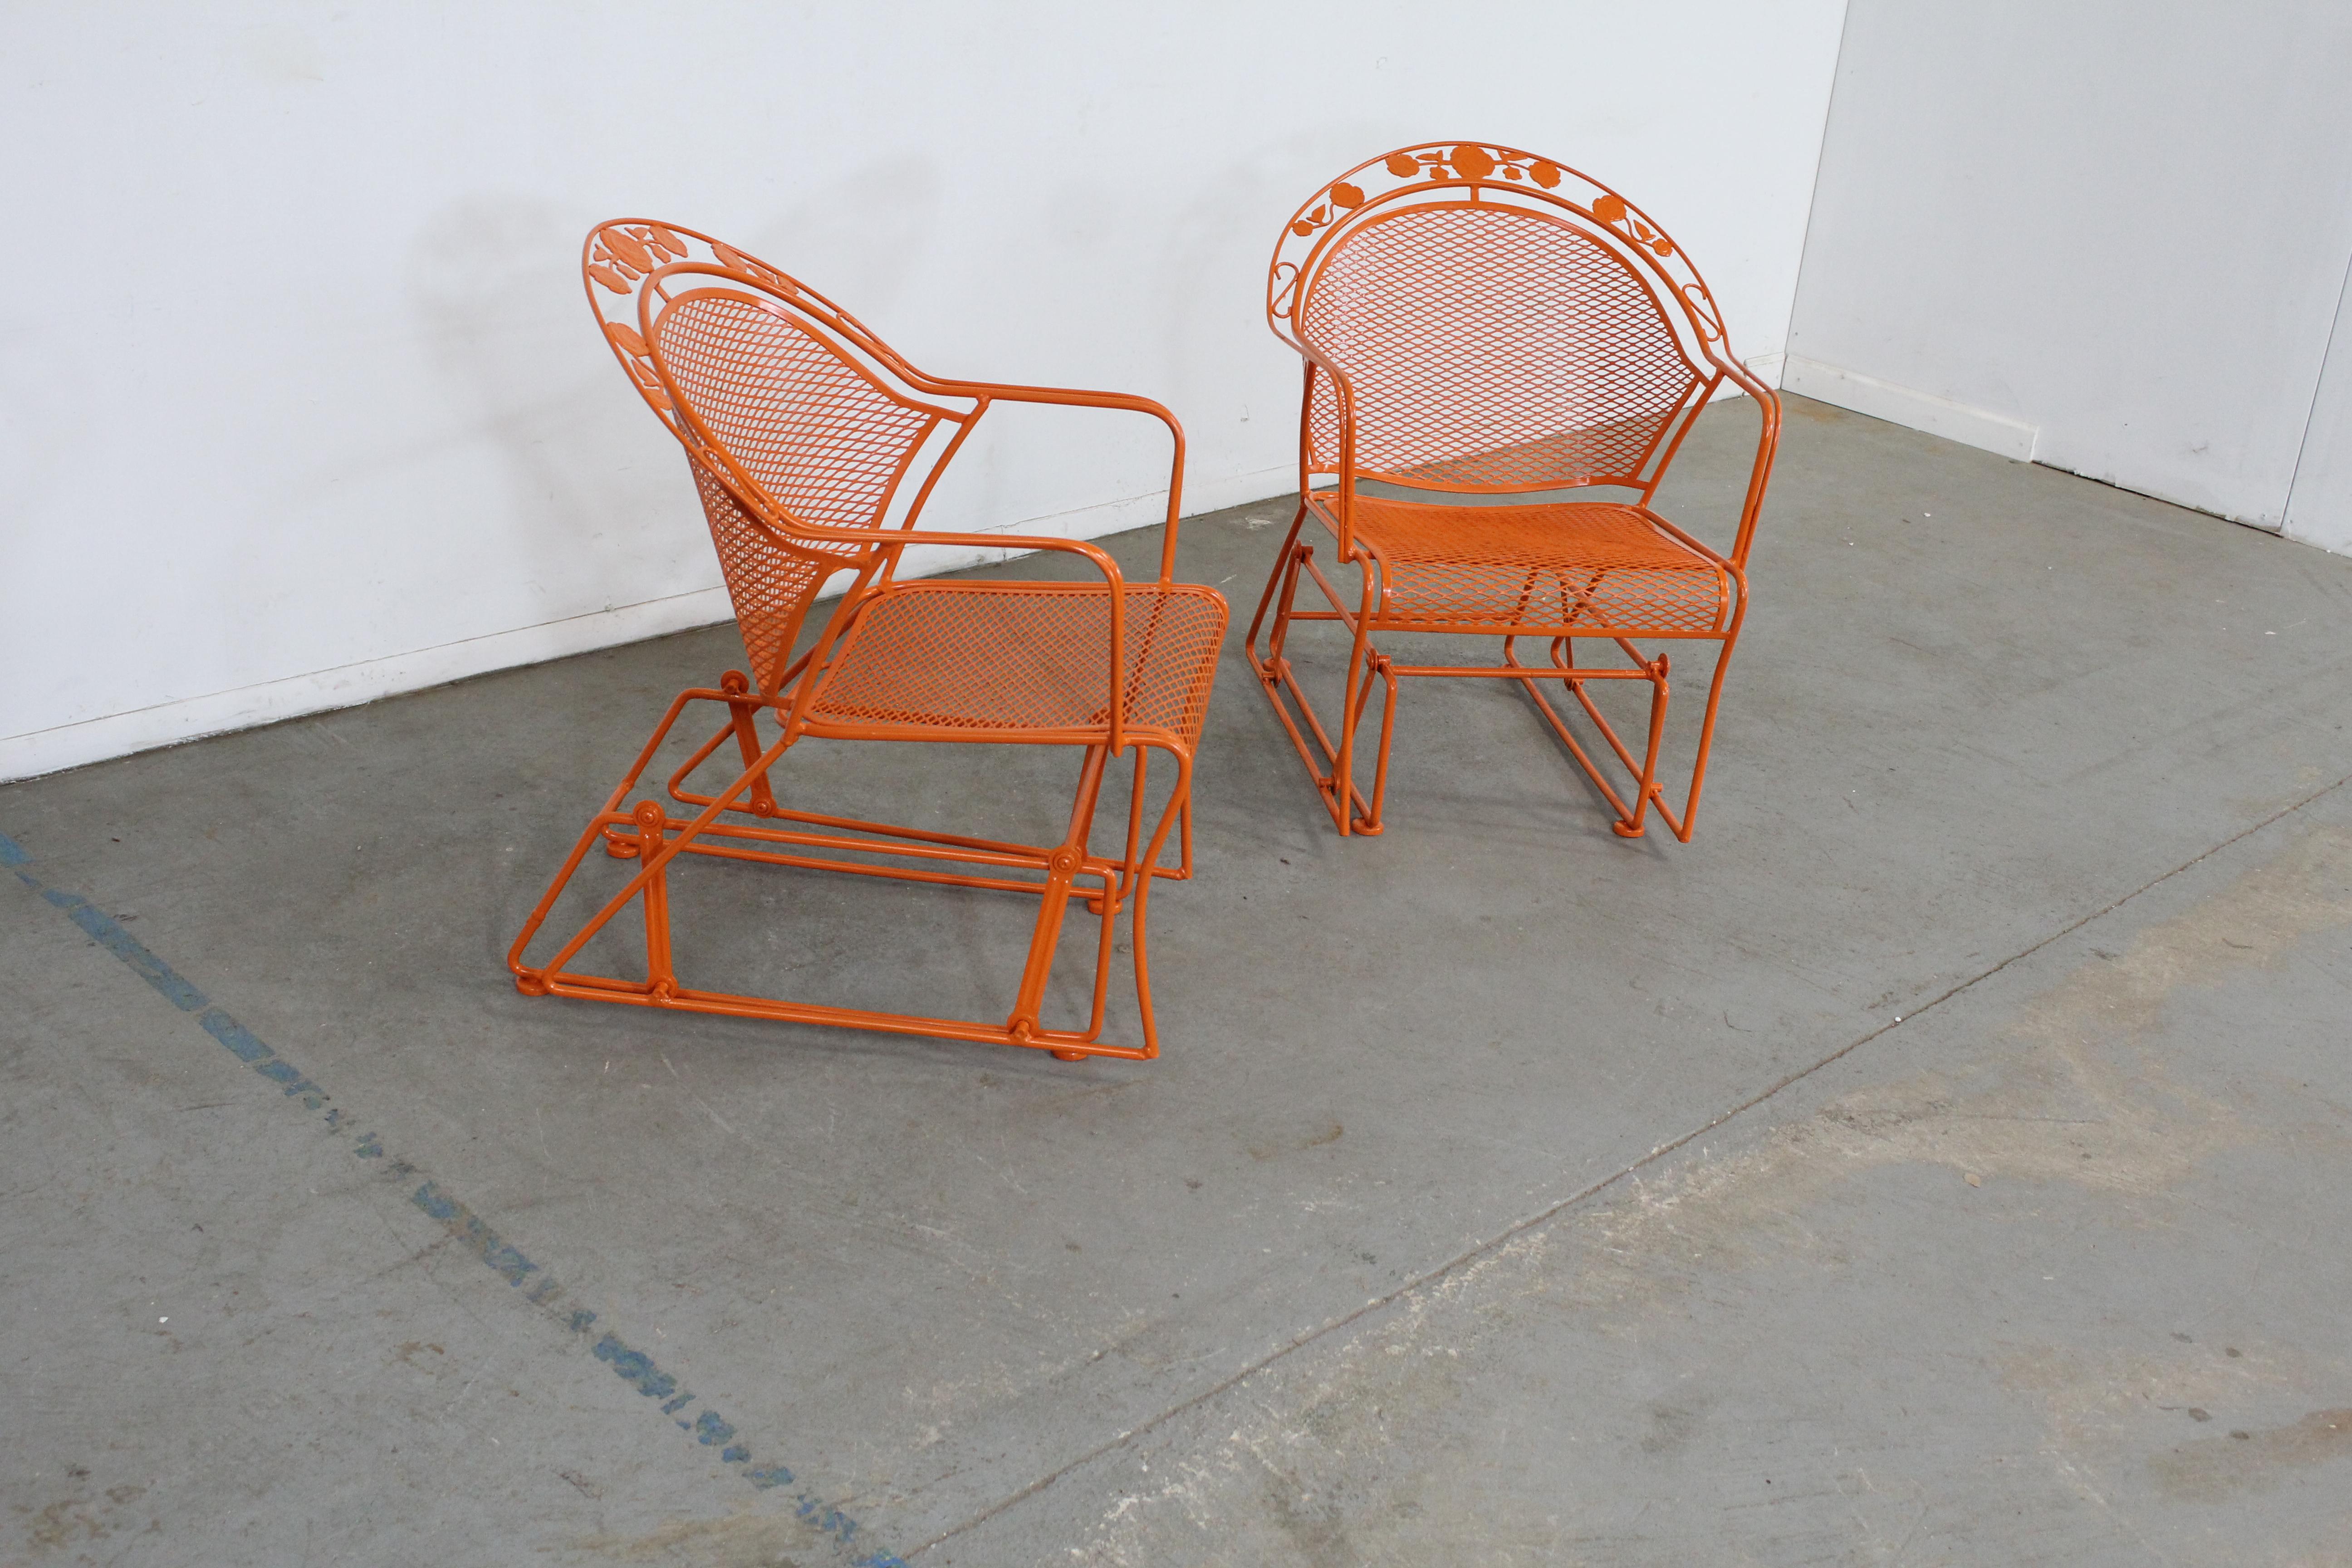 Pair of mid-century Salterini Glider lounge chairs

Offered is a pair of vintage pair of mid-century Salterini Glider lounge chairs. These chairs glide forward and back., and have been repainted in an atomic orange. They're in good condition